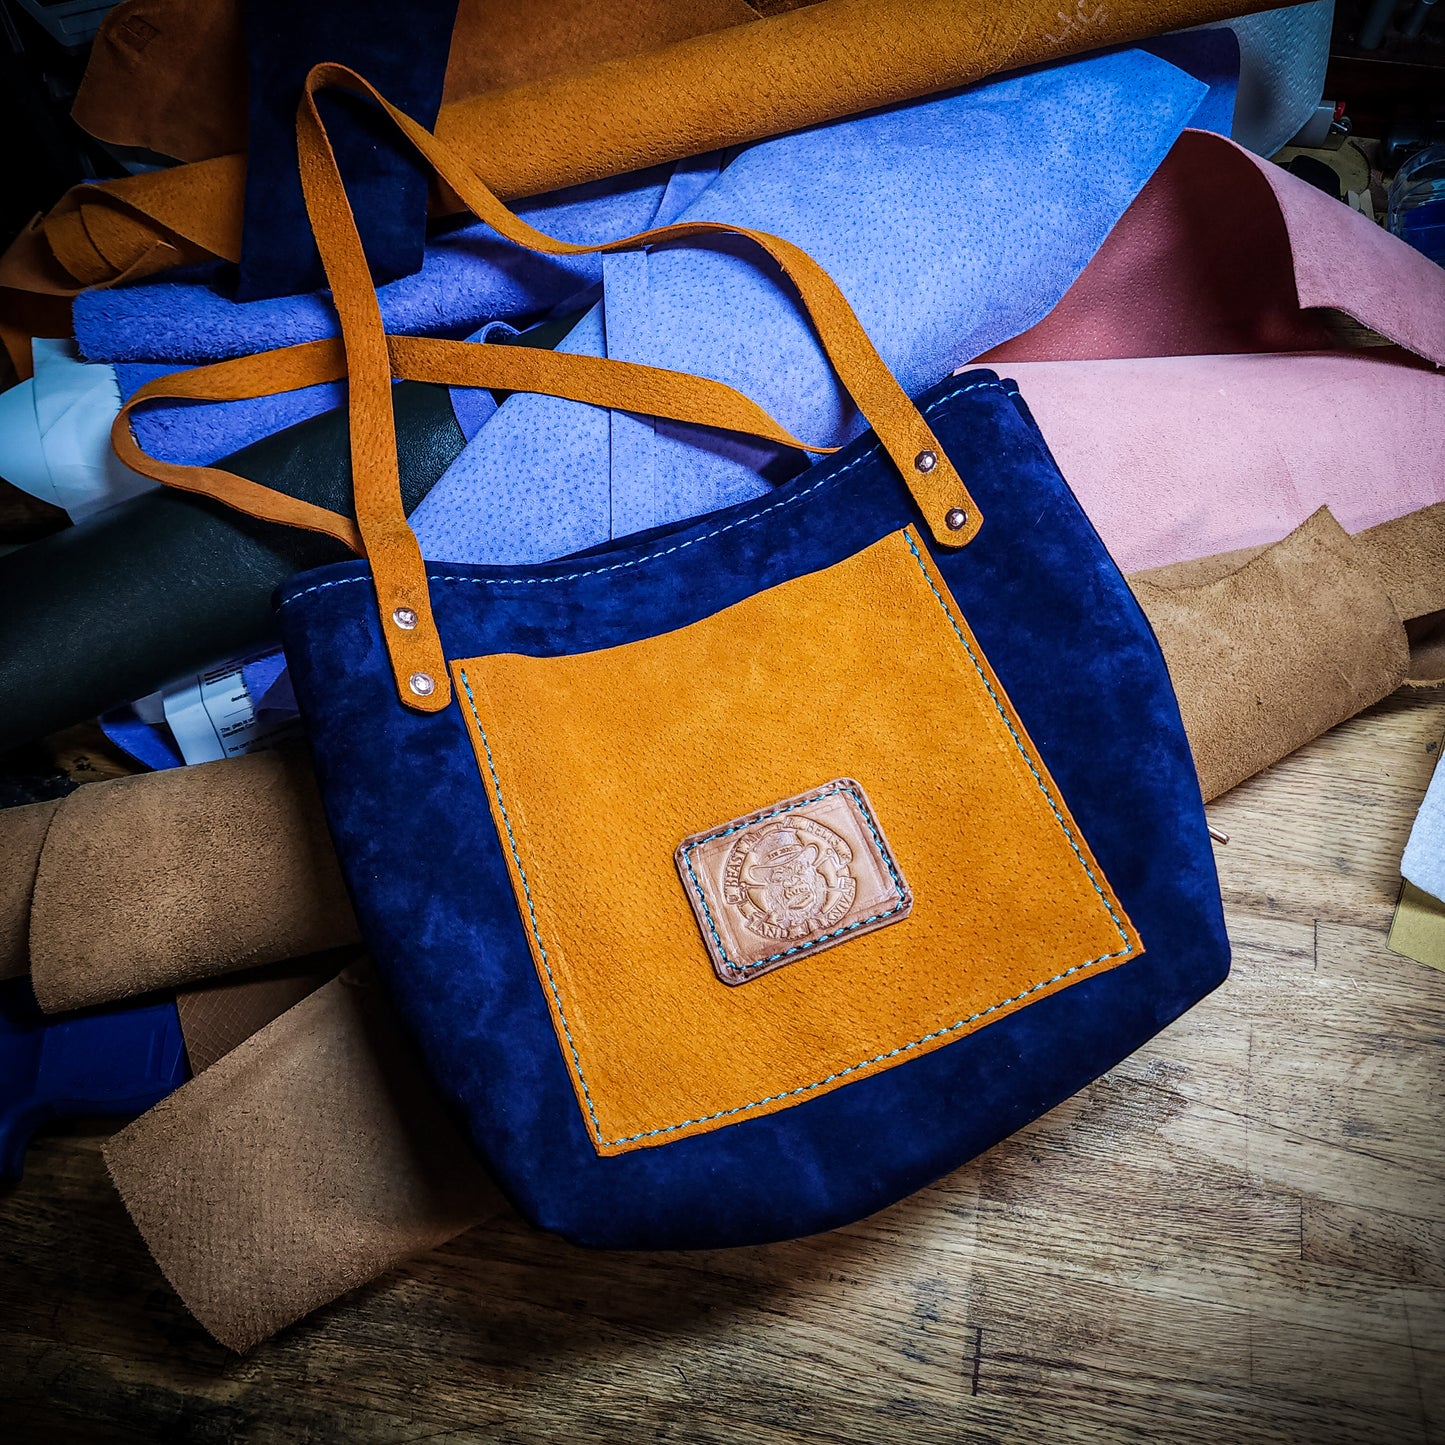 Blue and brown leather tote bag